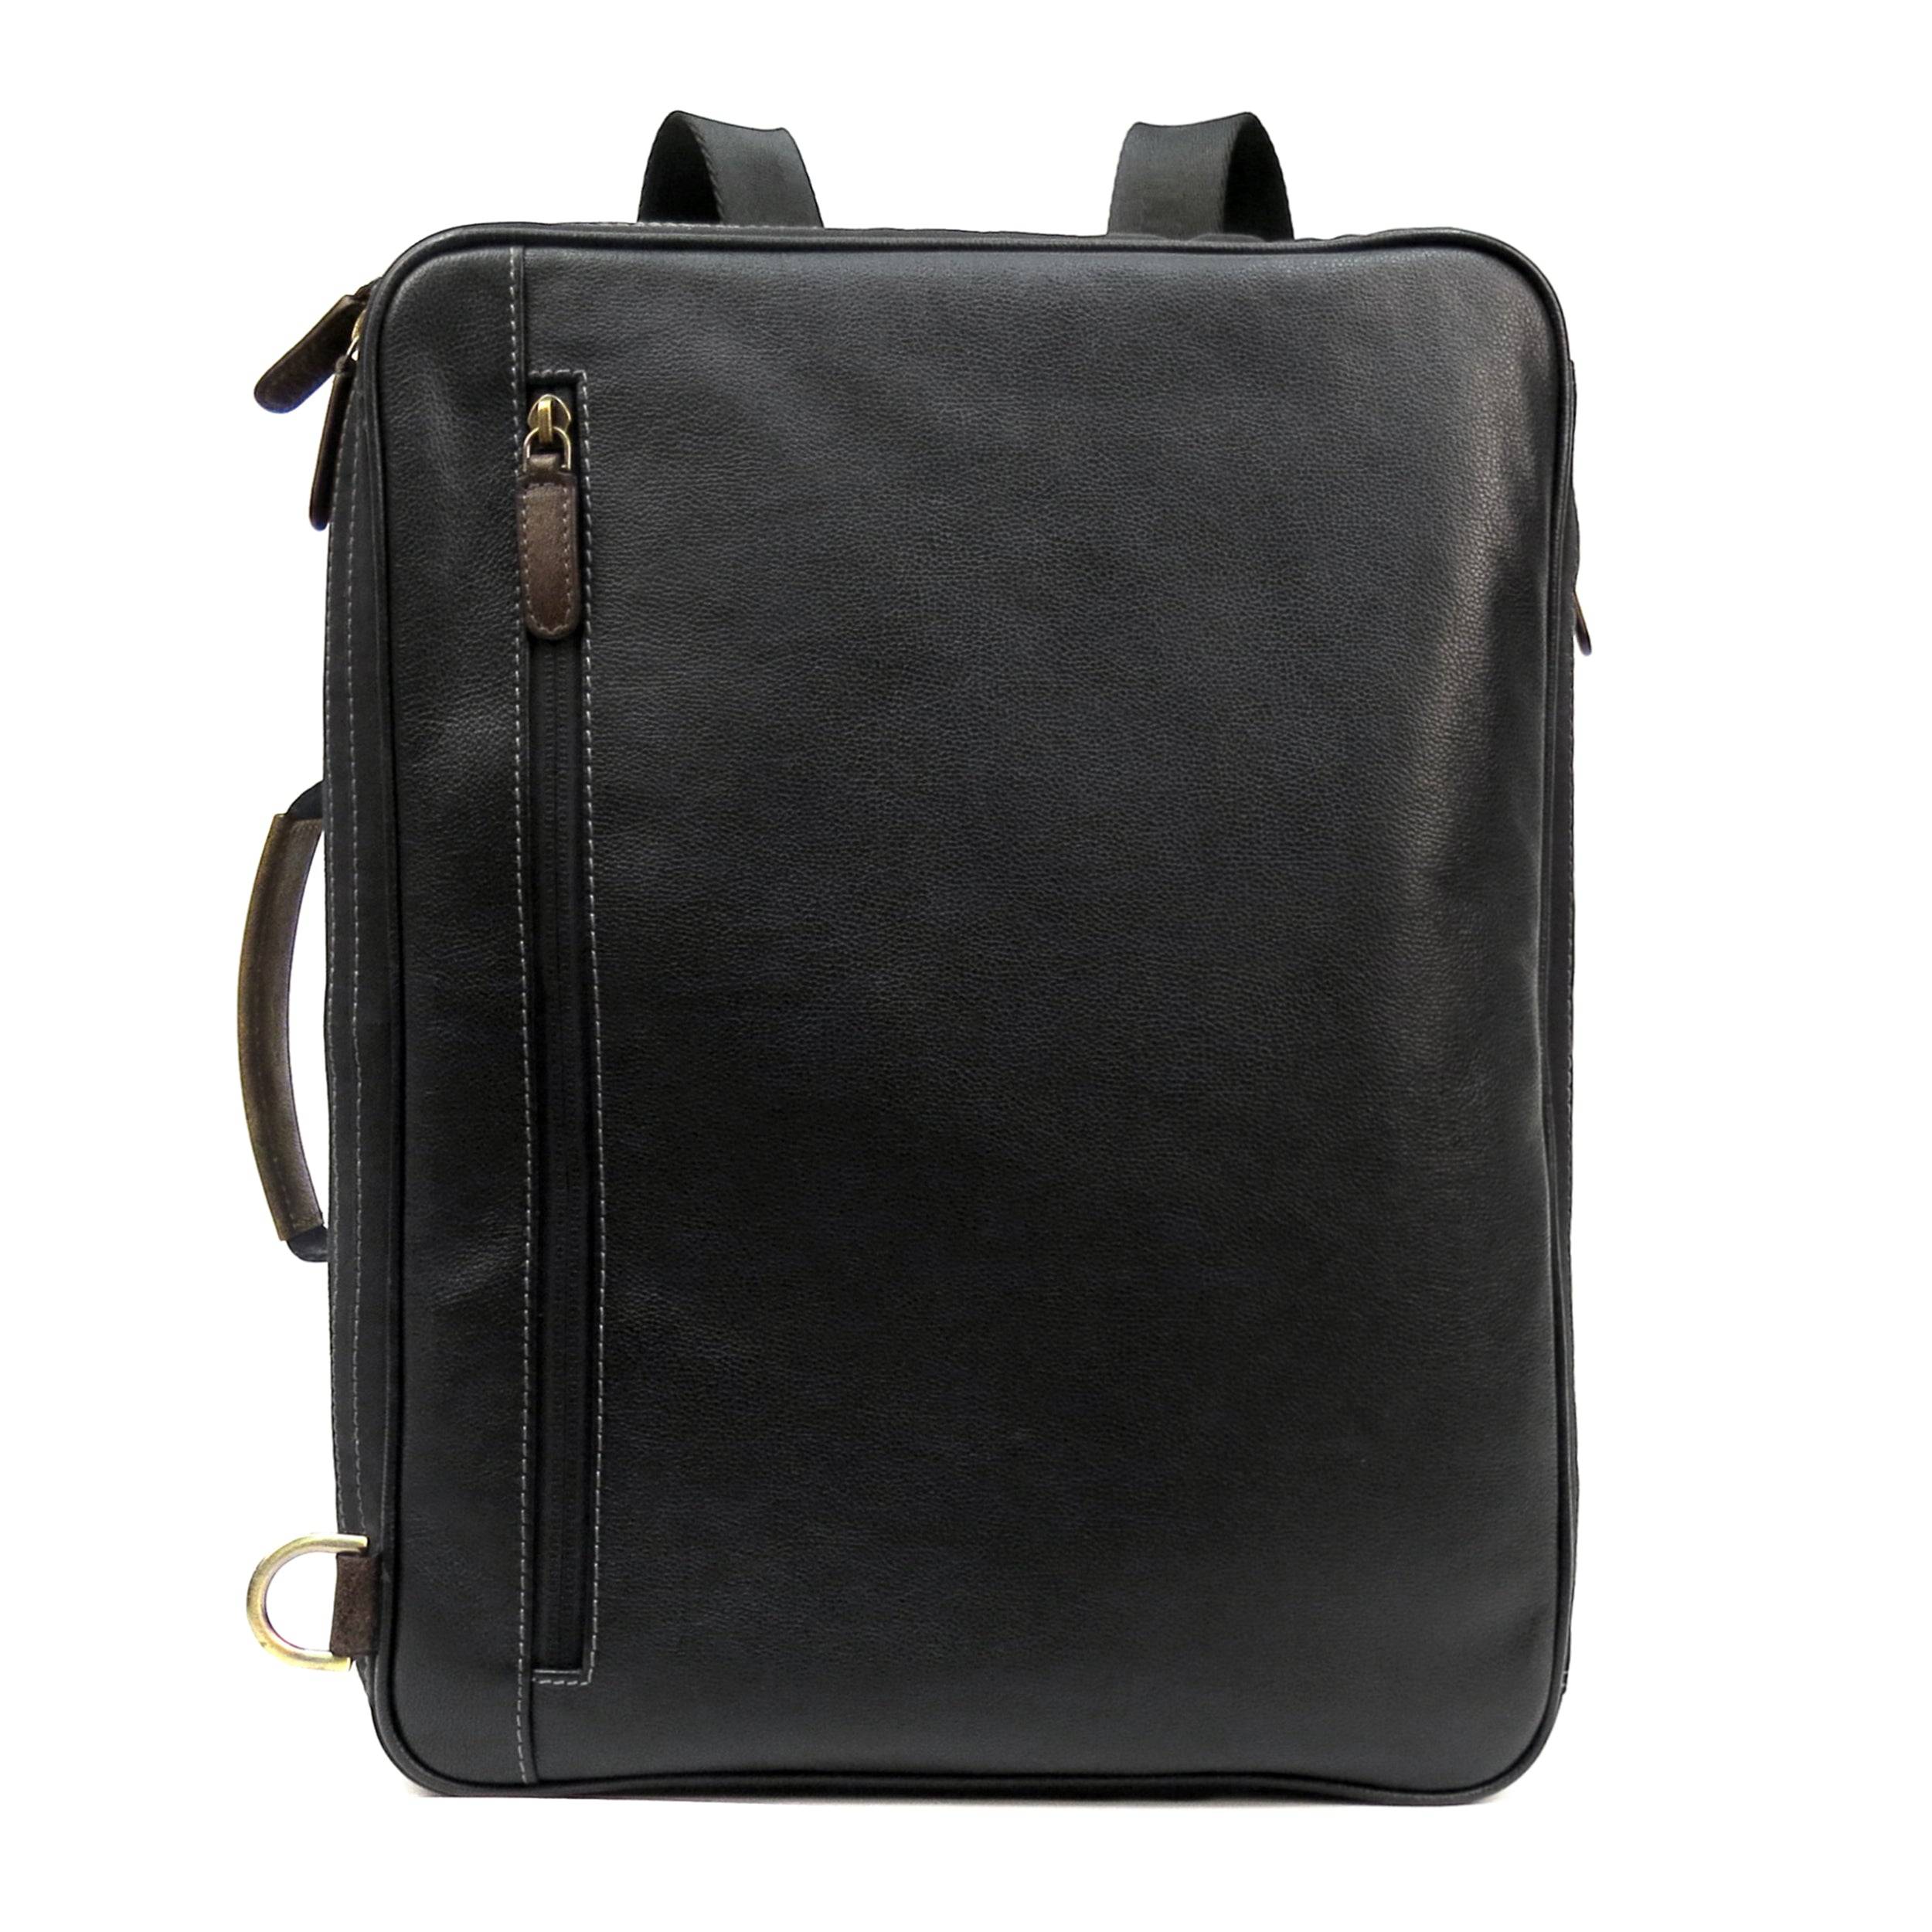 Garth Convertible 2-in-1 Leather Backpack